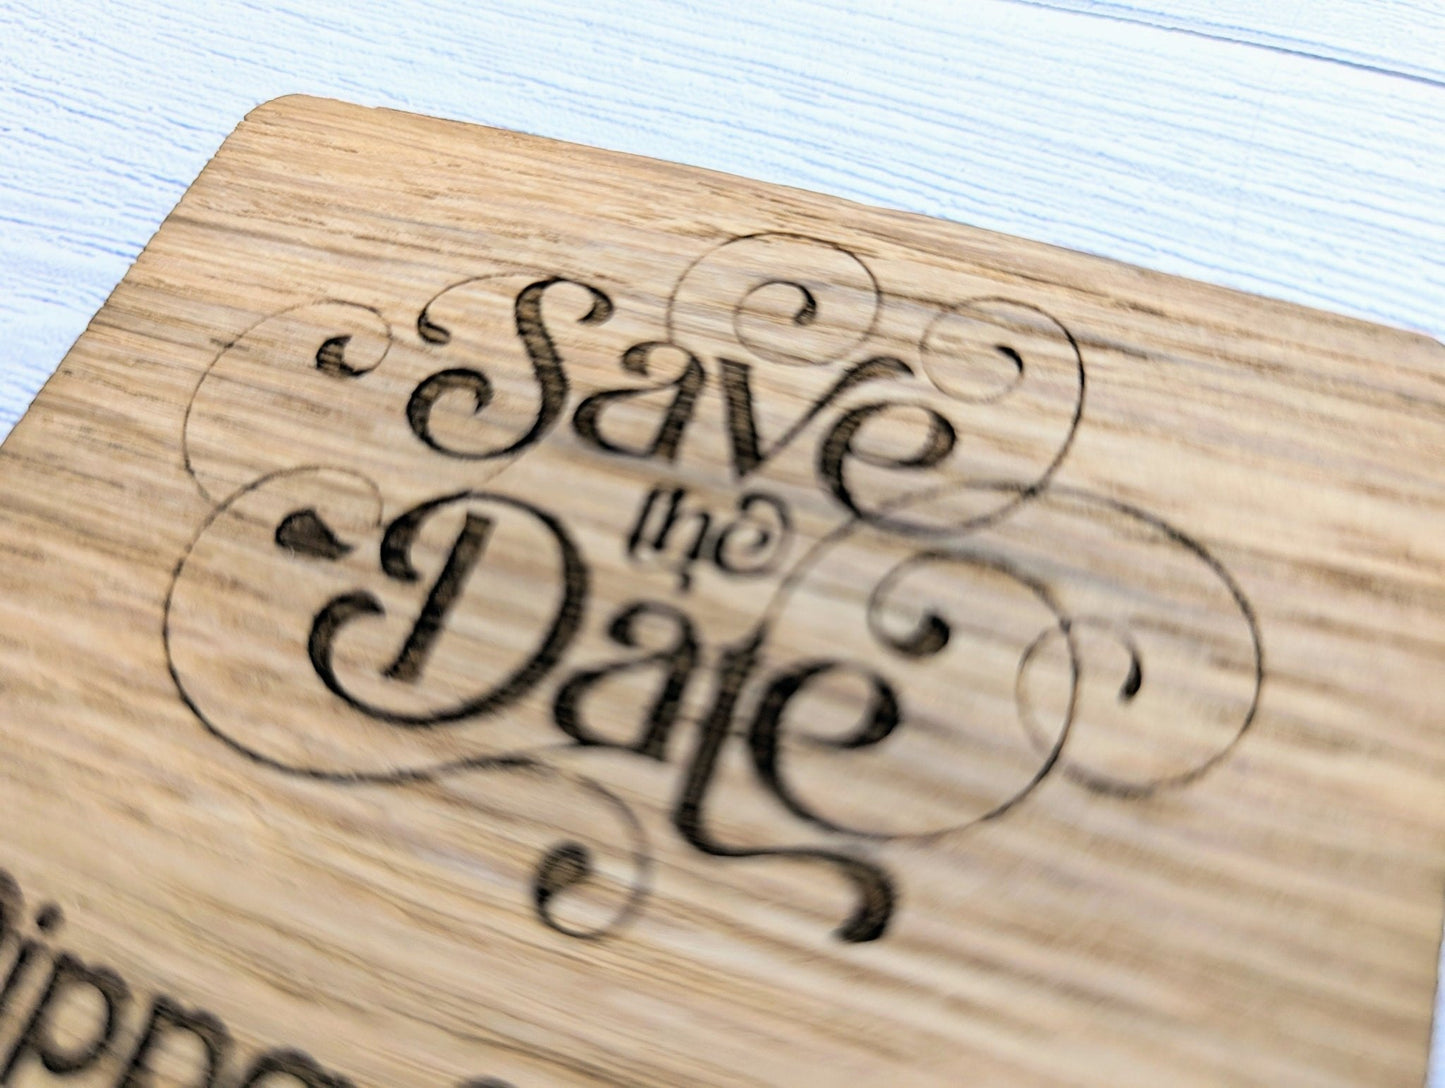 Eco-Friendly 'Save The Date' Personalised Wooden Coasters - CherryGroveCraft